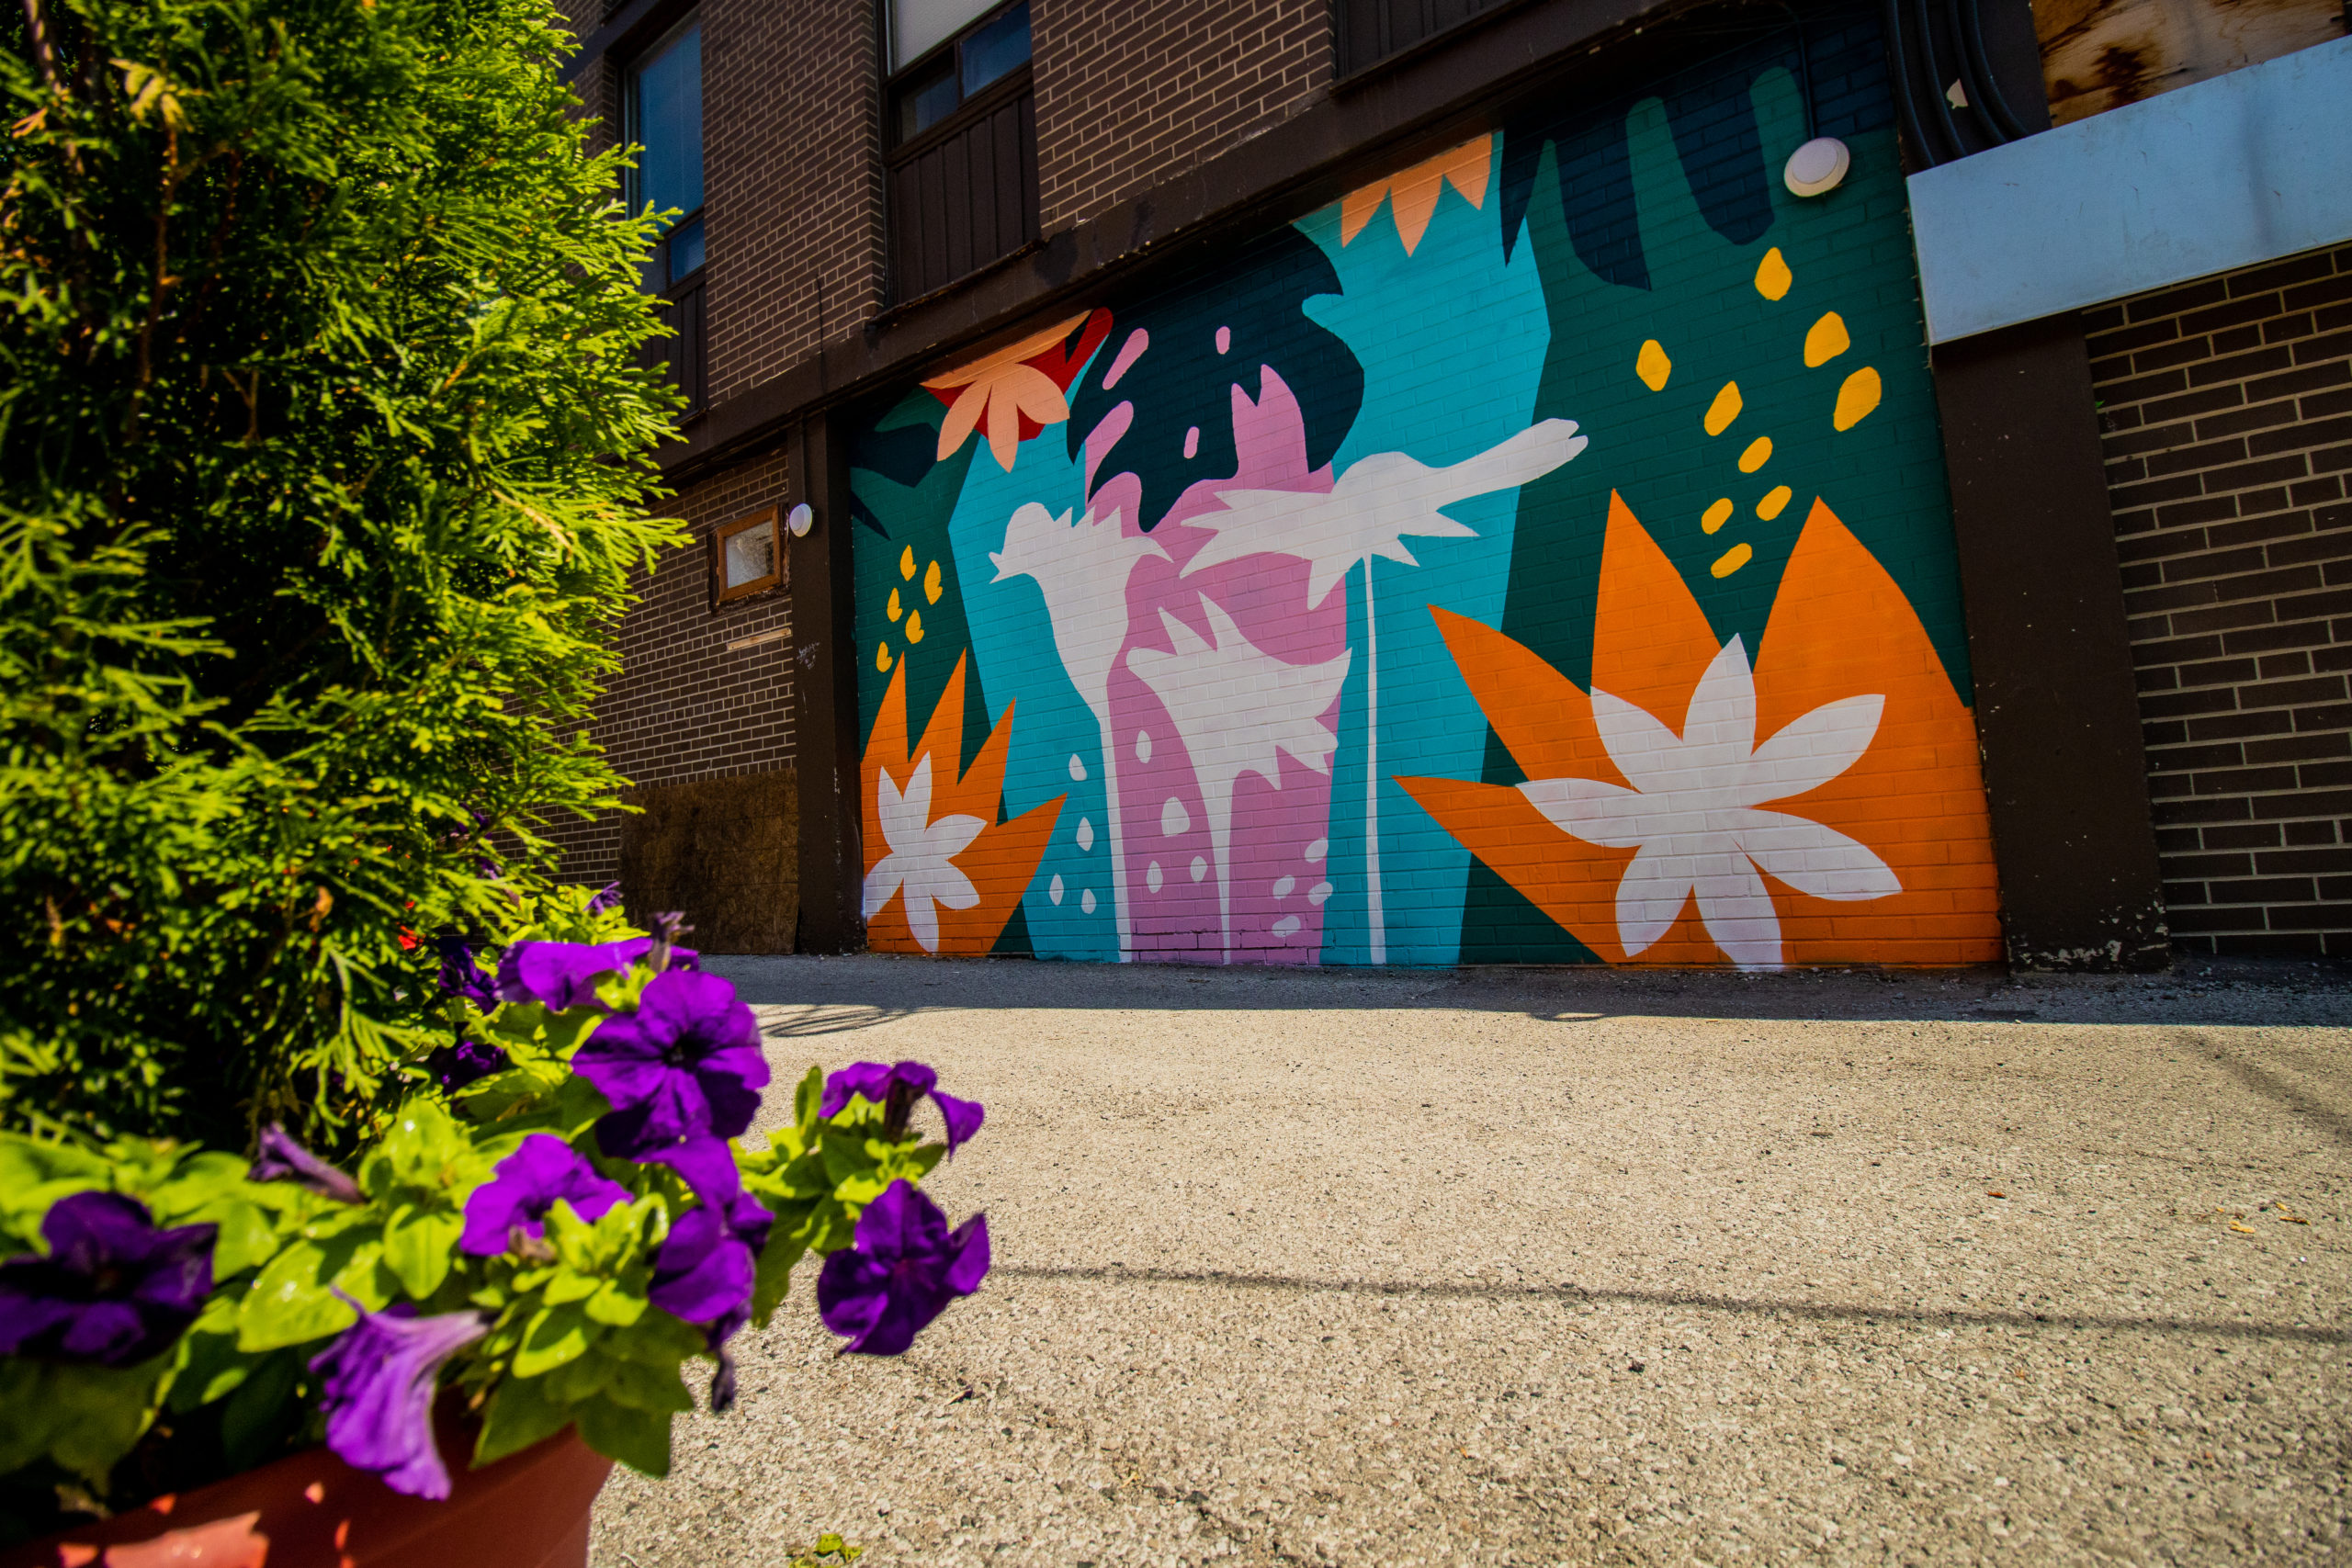 GETSO's mural painted in bright colours with abstract shapes and flowers